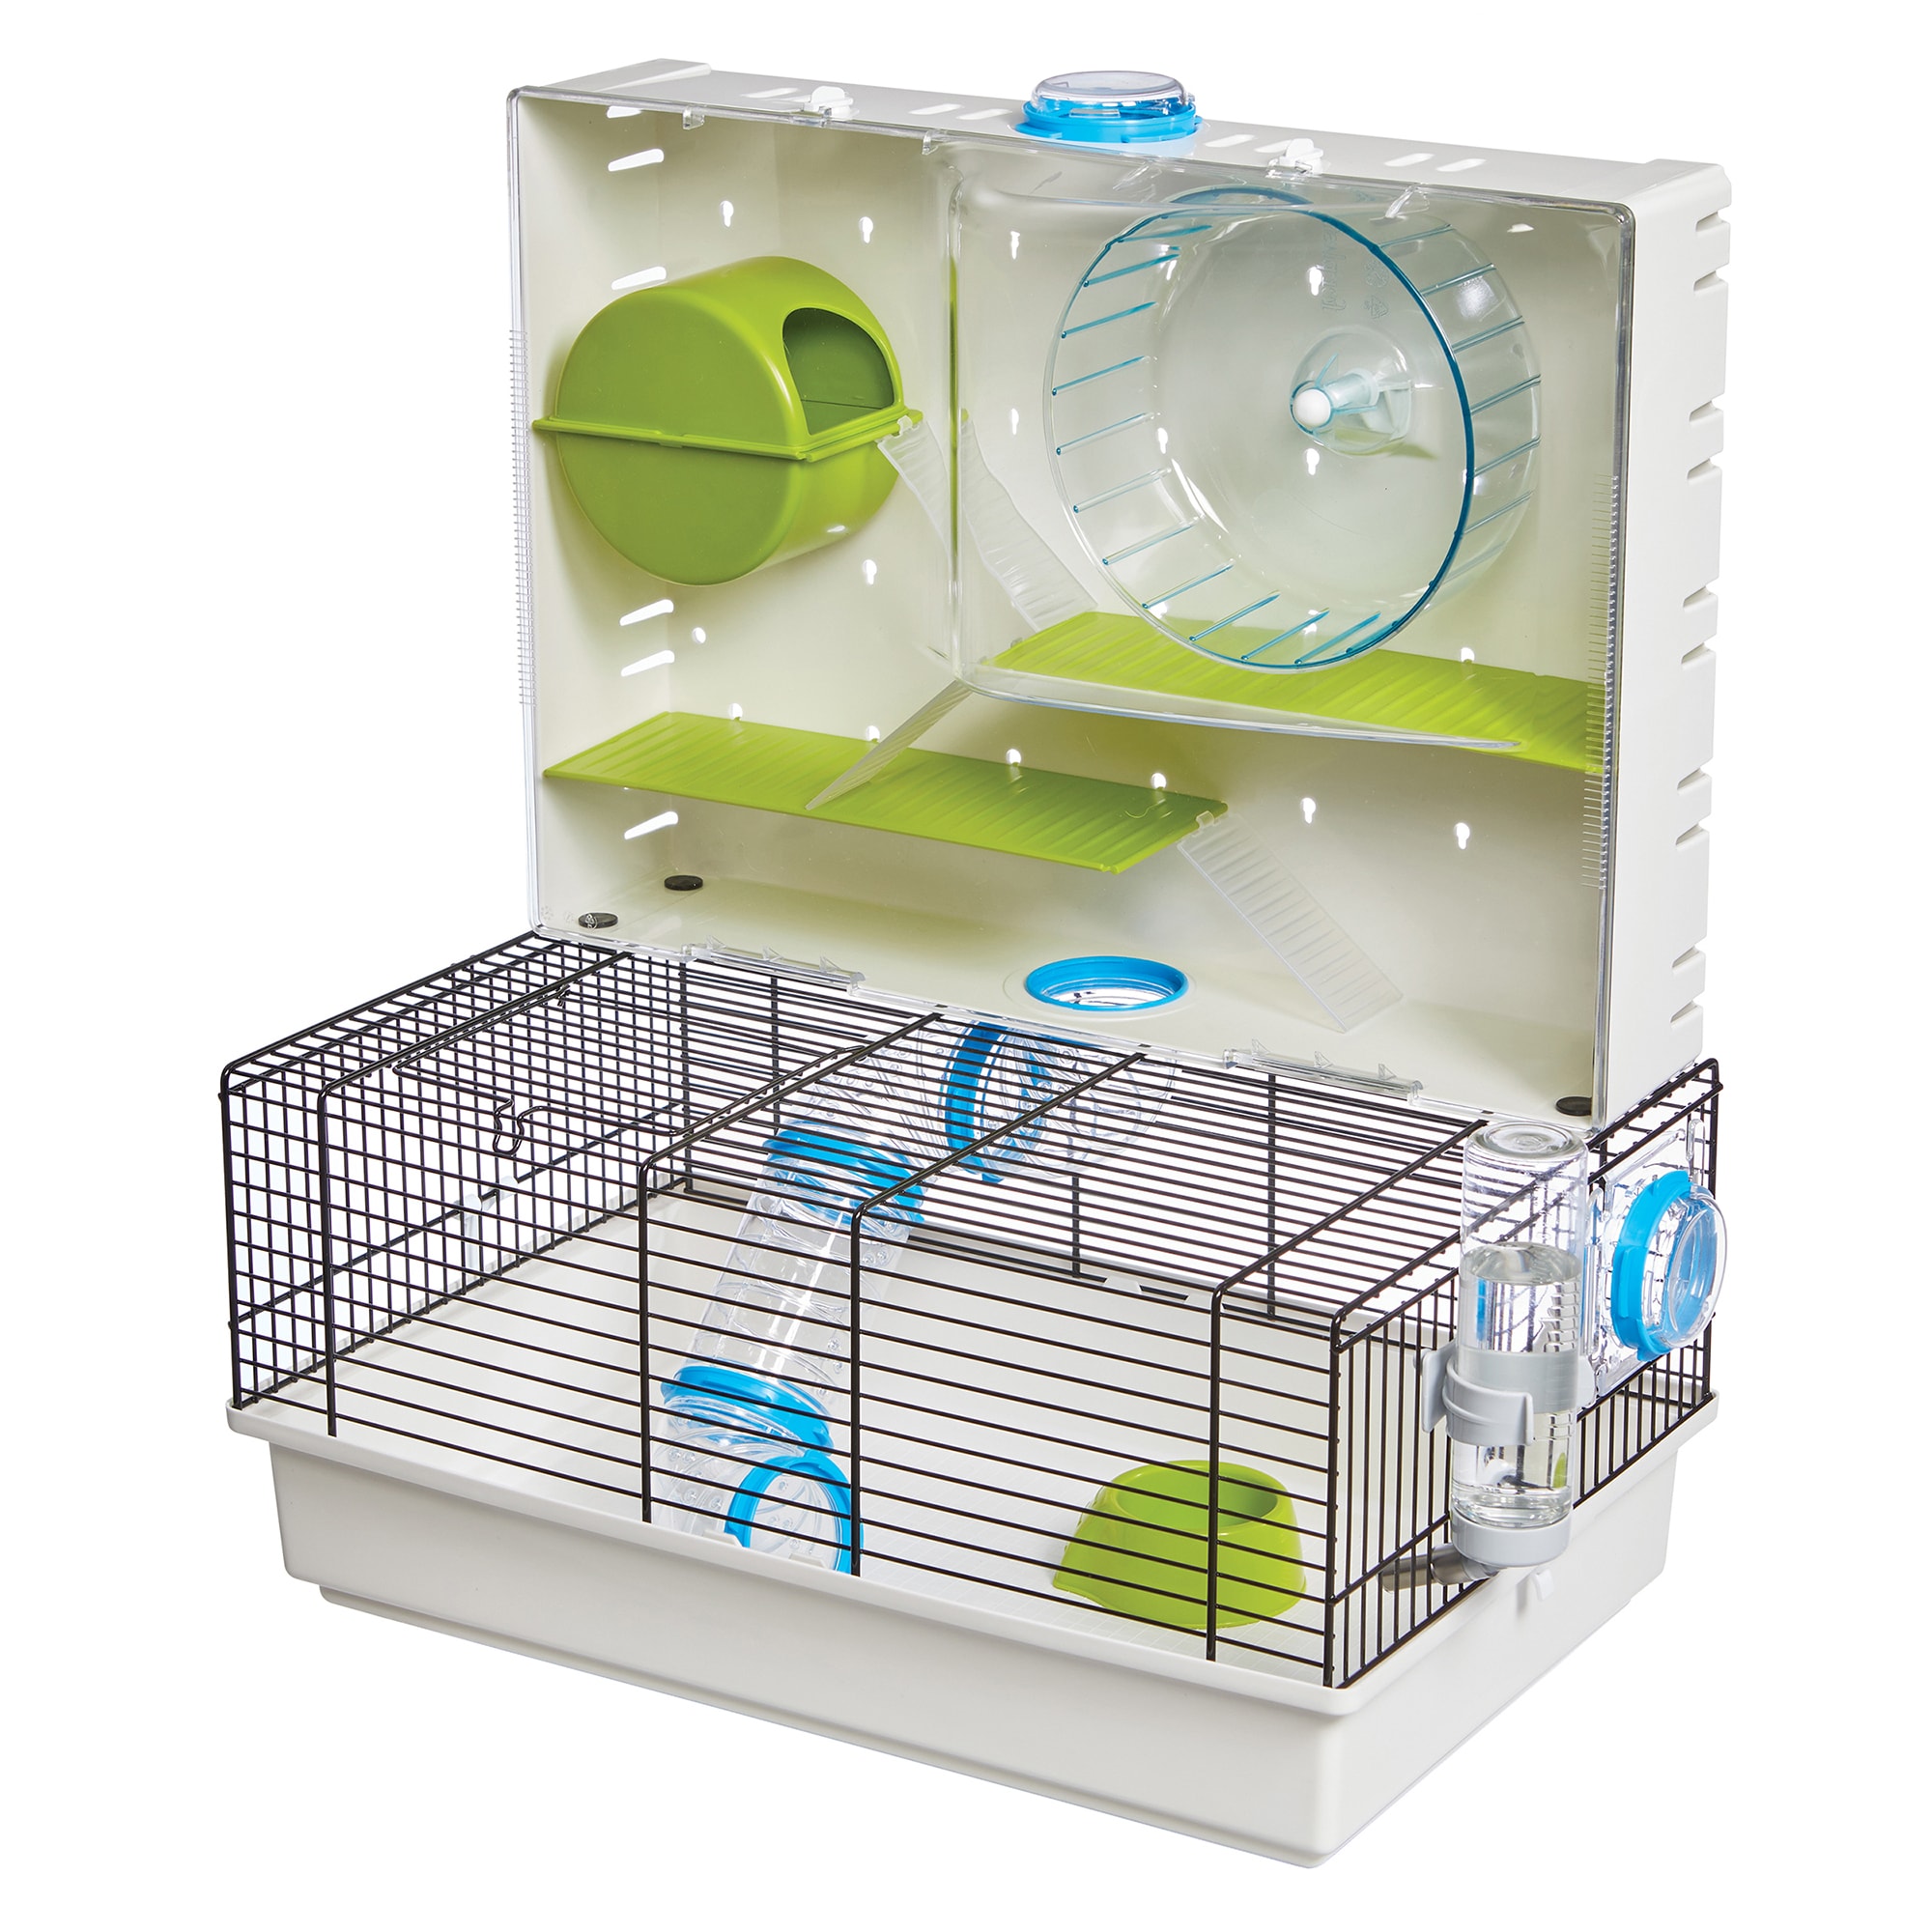 450 square inch hamster cage